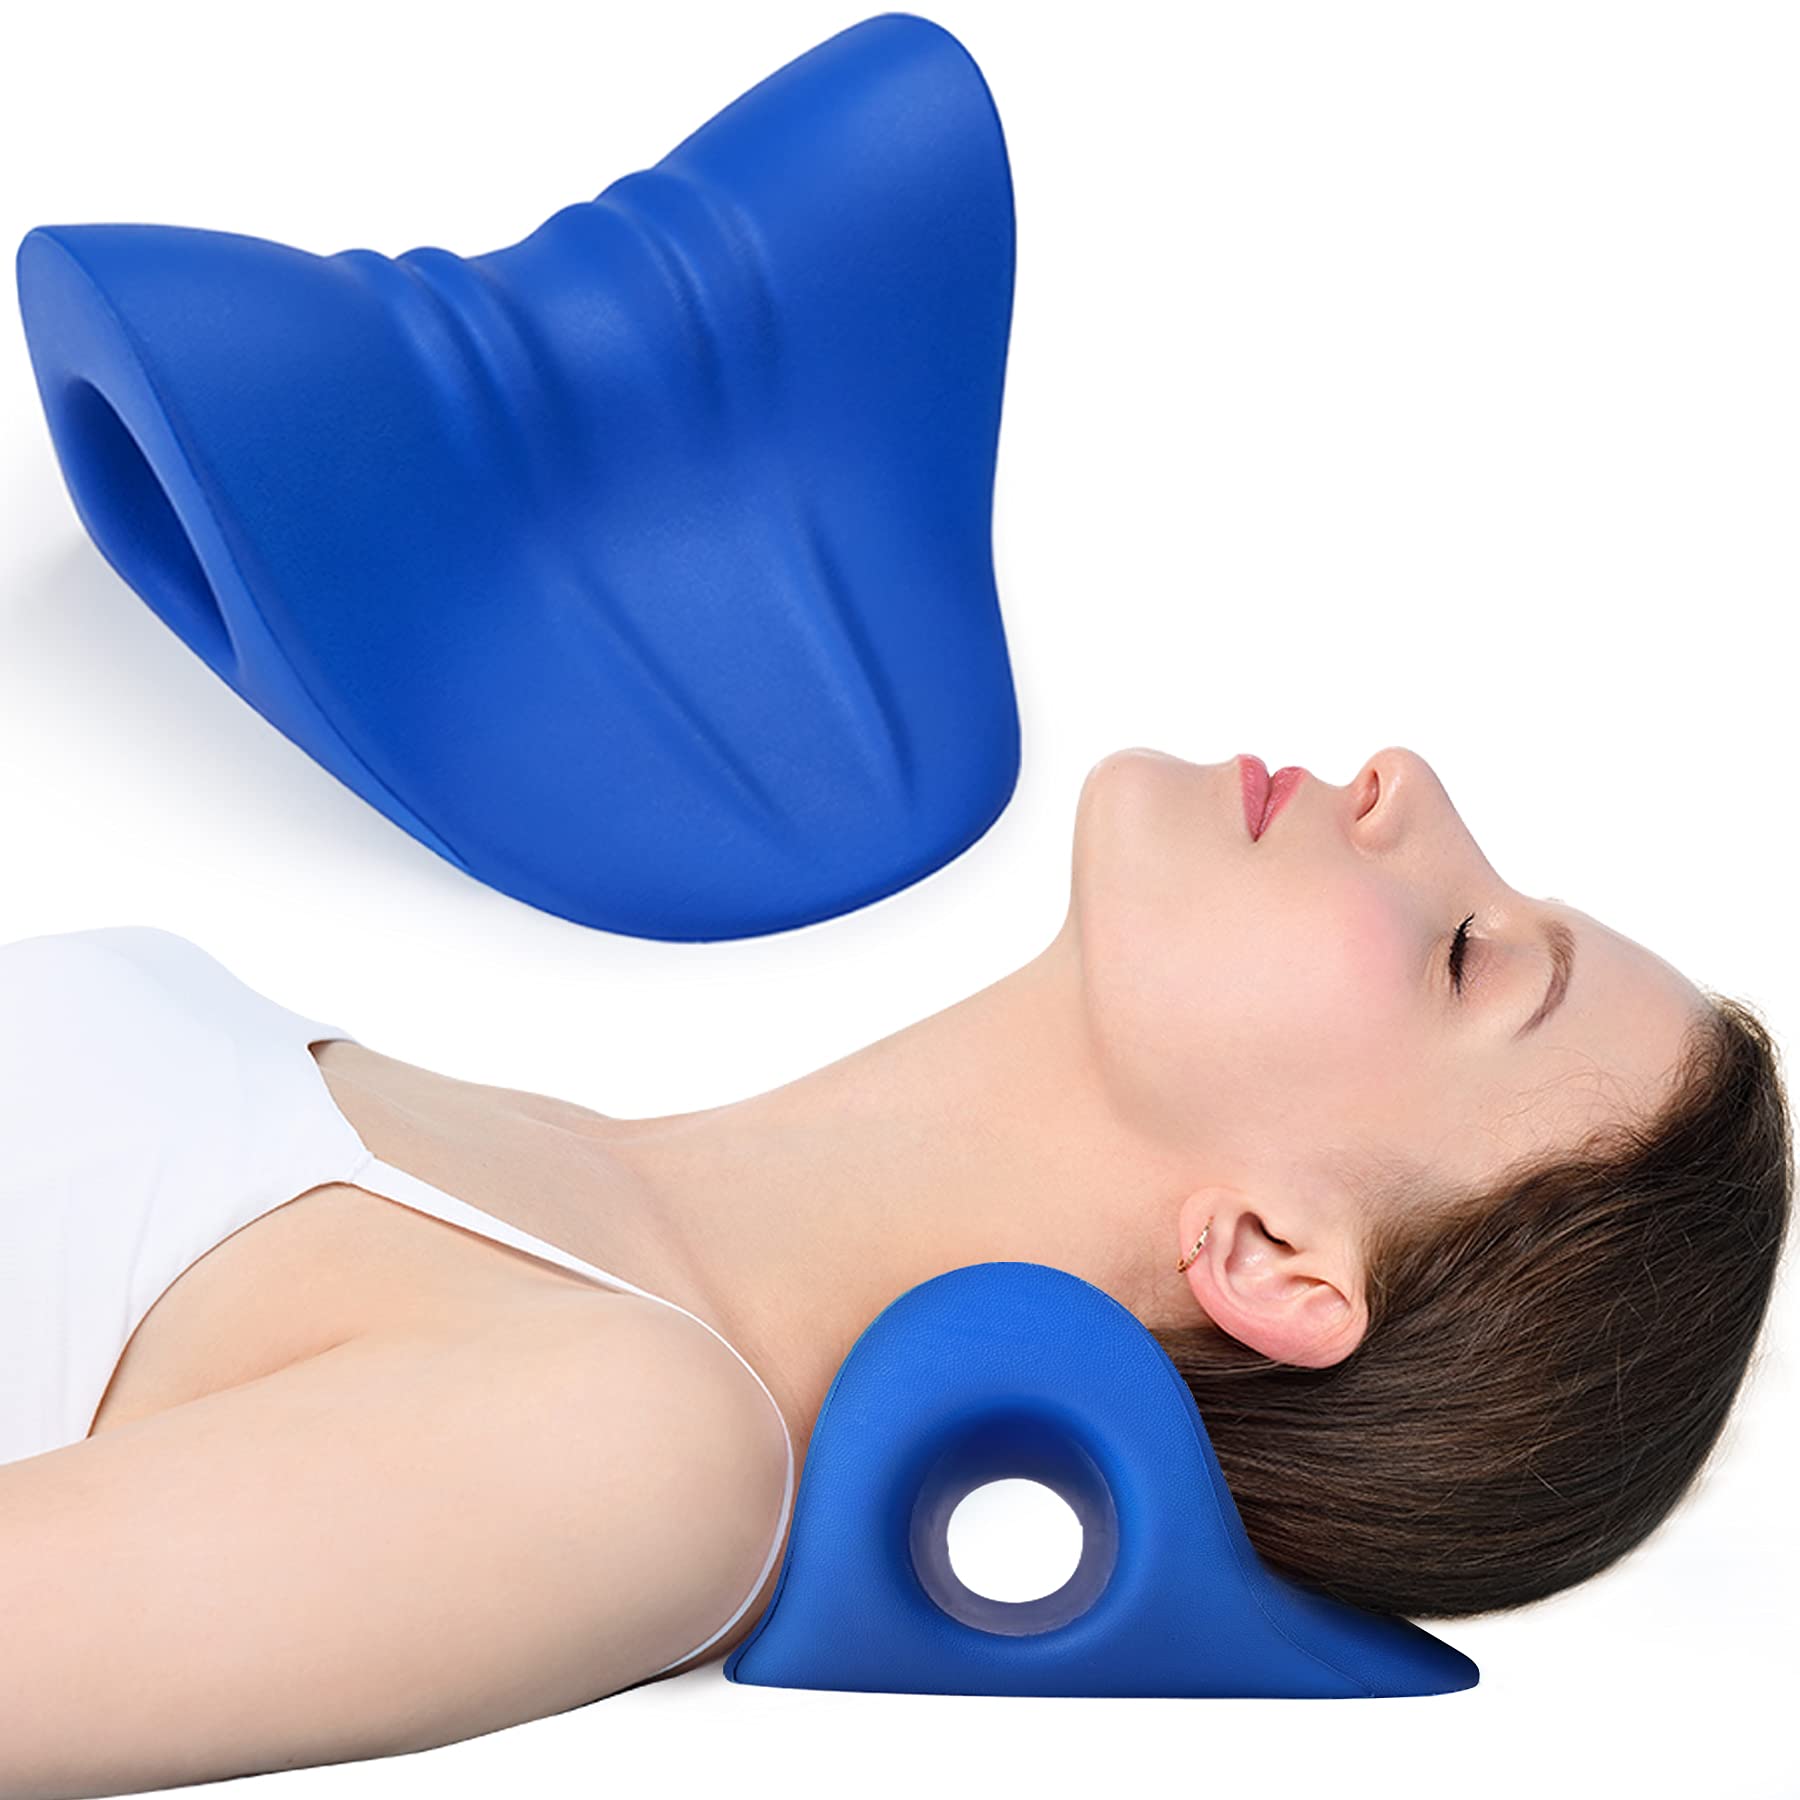 Incredible Chiropractic Neck Pillow References